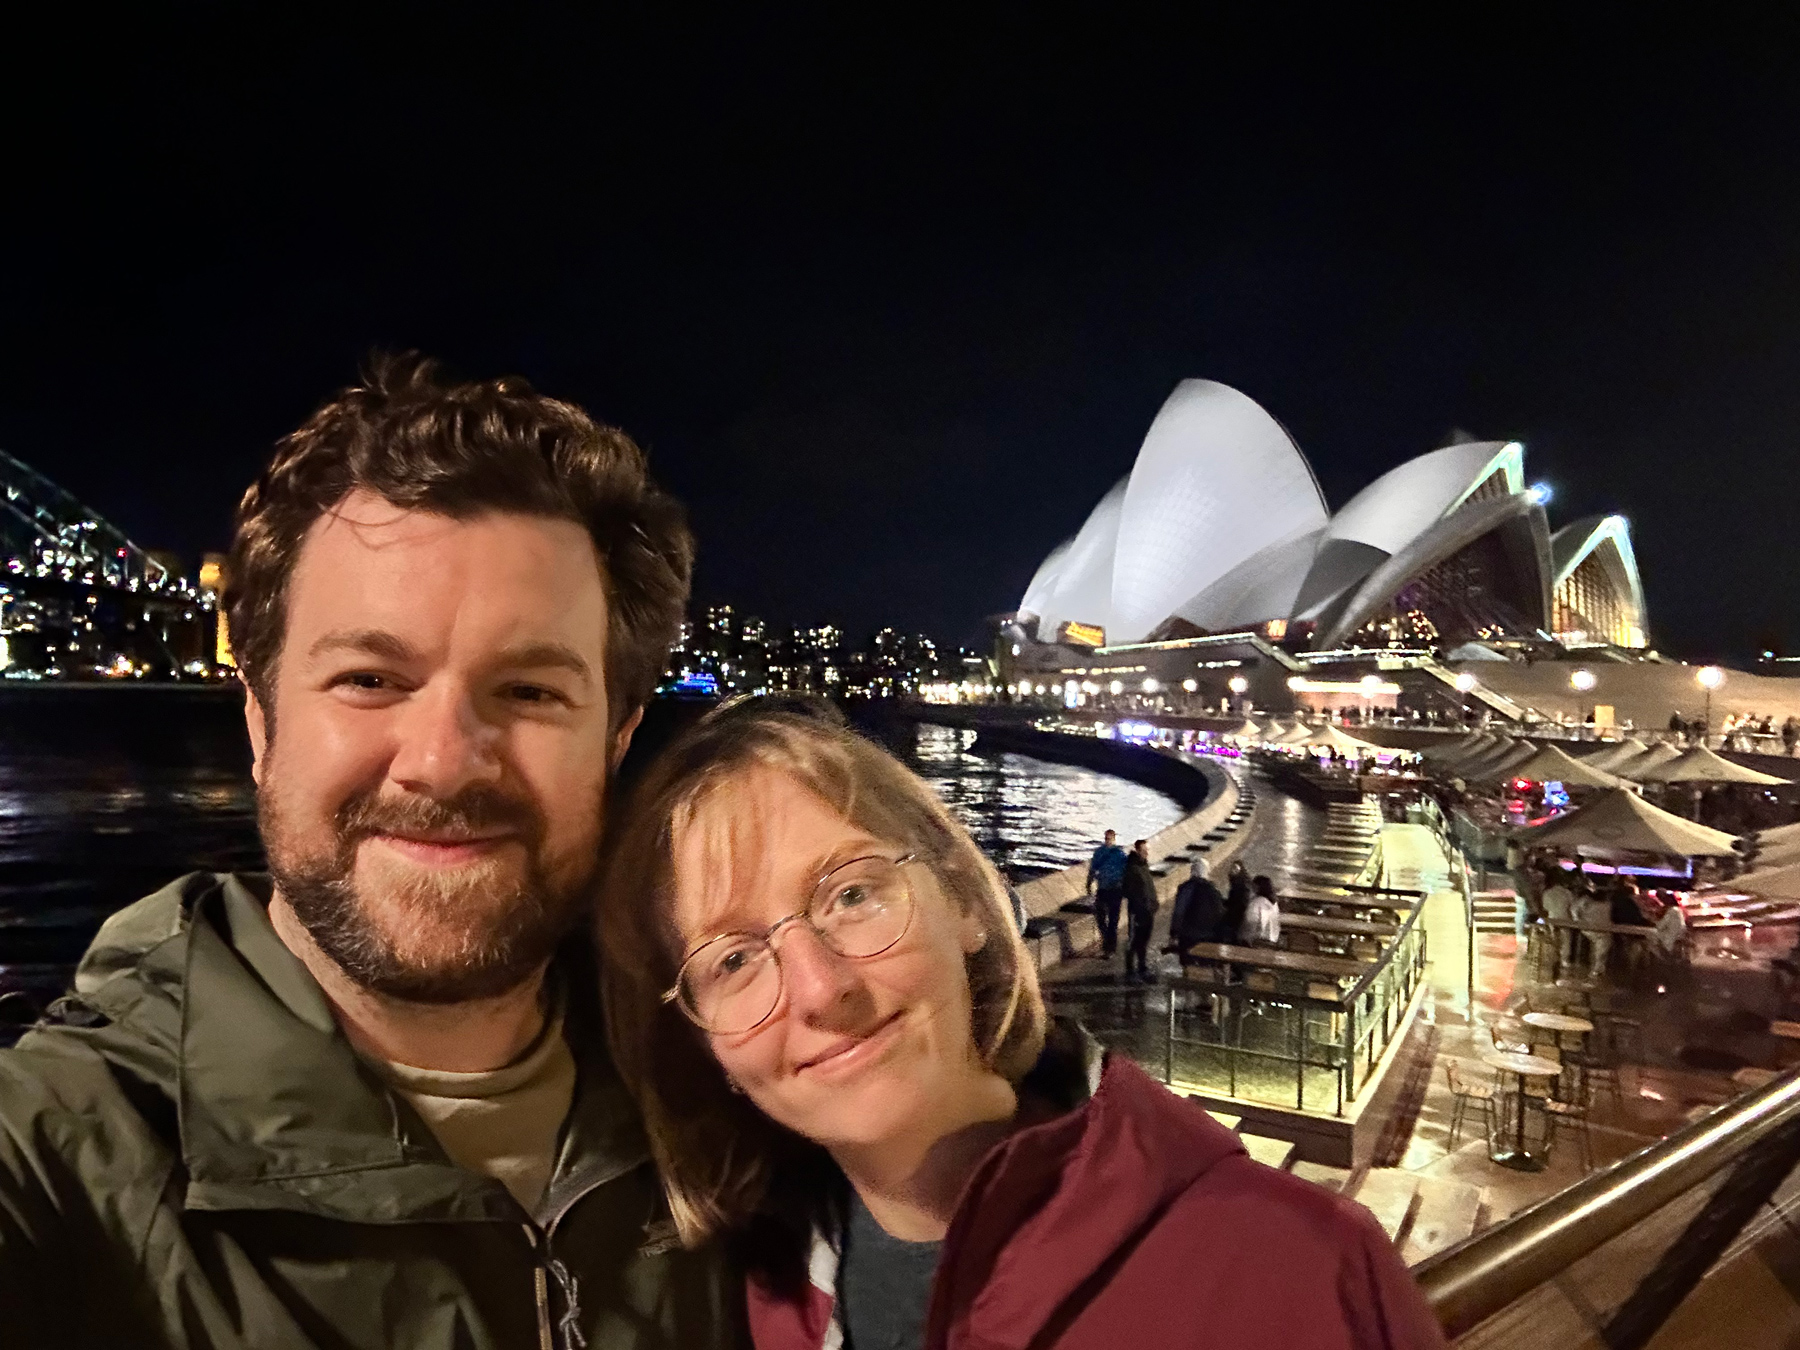 A selfie of me and Charlotte standing in front of Sydney Opera House on a rainy night